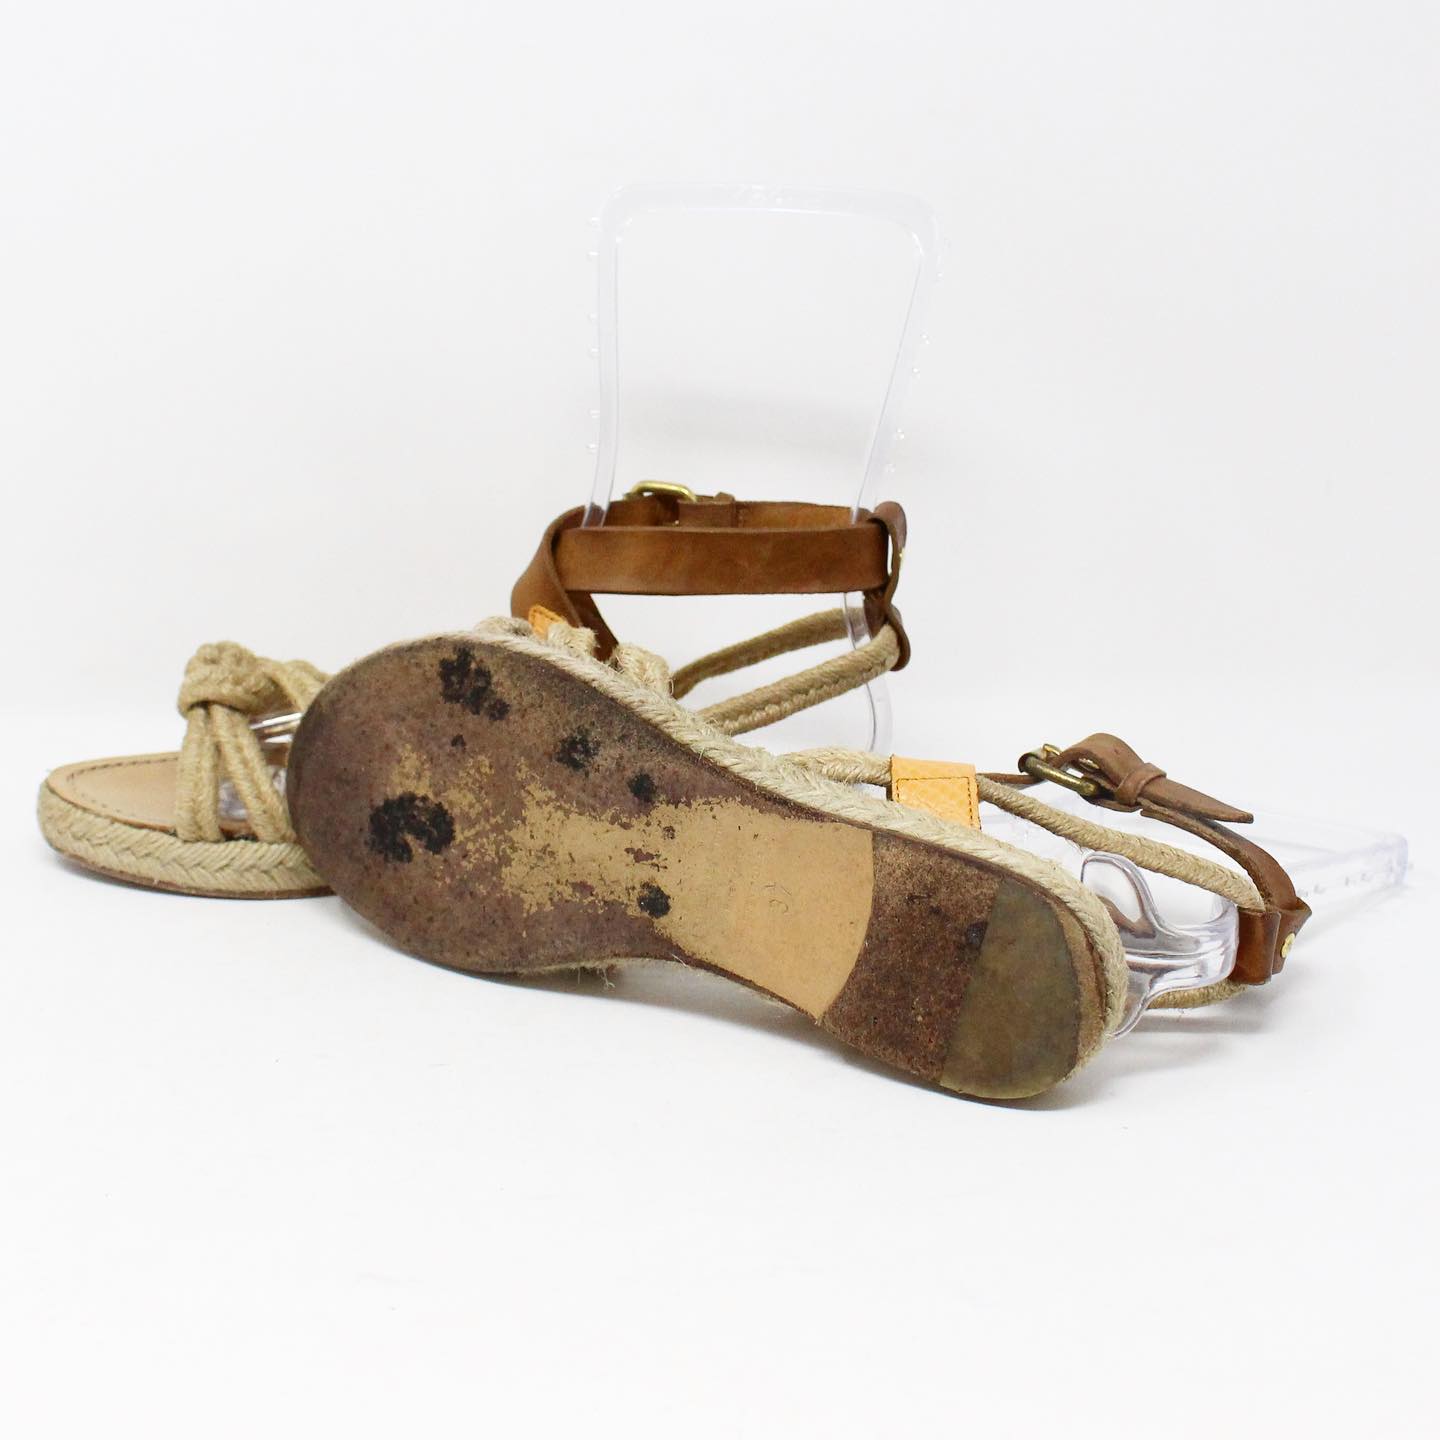 Kruiden Afvoer taxi ISABEL MARANT #30548 Tan Leather Lace Up Sandals (US 7 EU 37) – ALL YOUR  BLISS